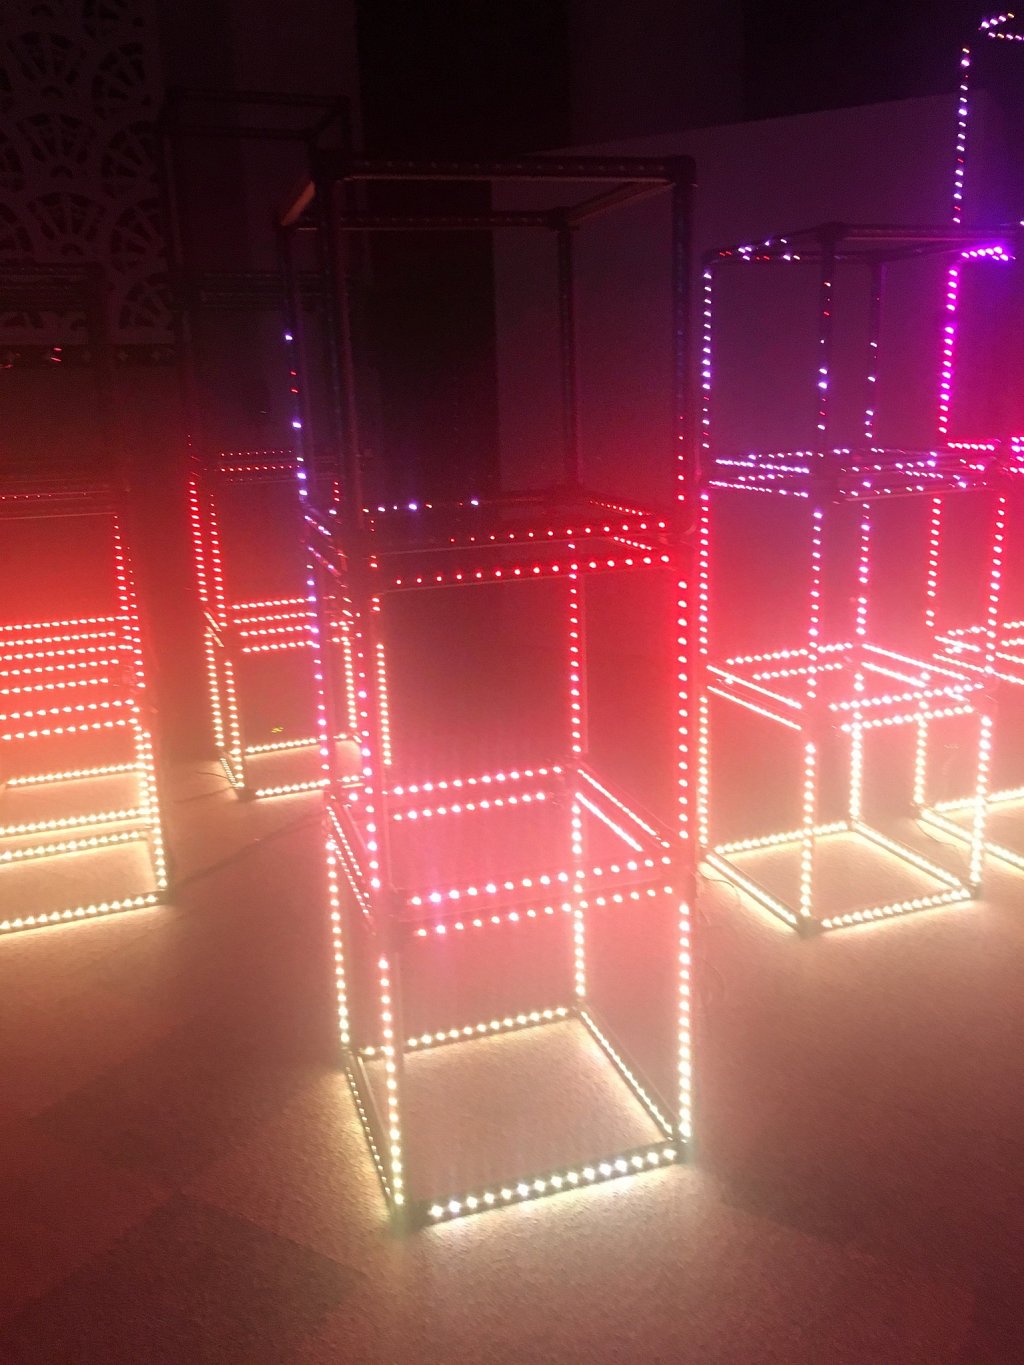 Preview Events - Social Innovation Week - lighting boxes.jpg